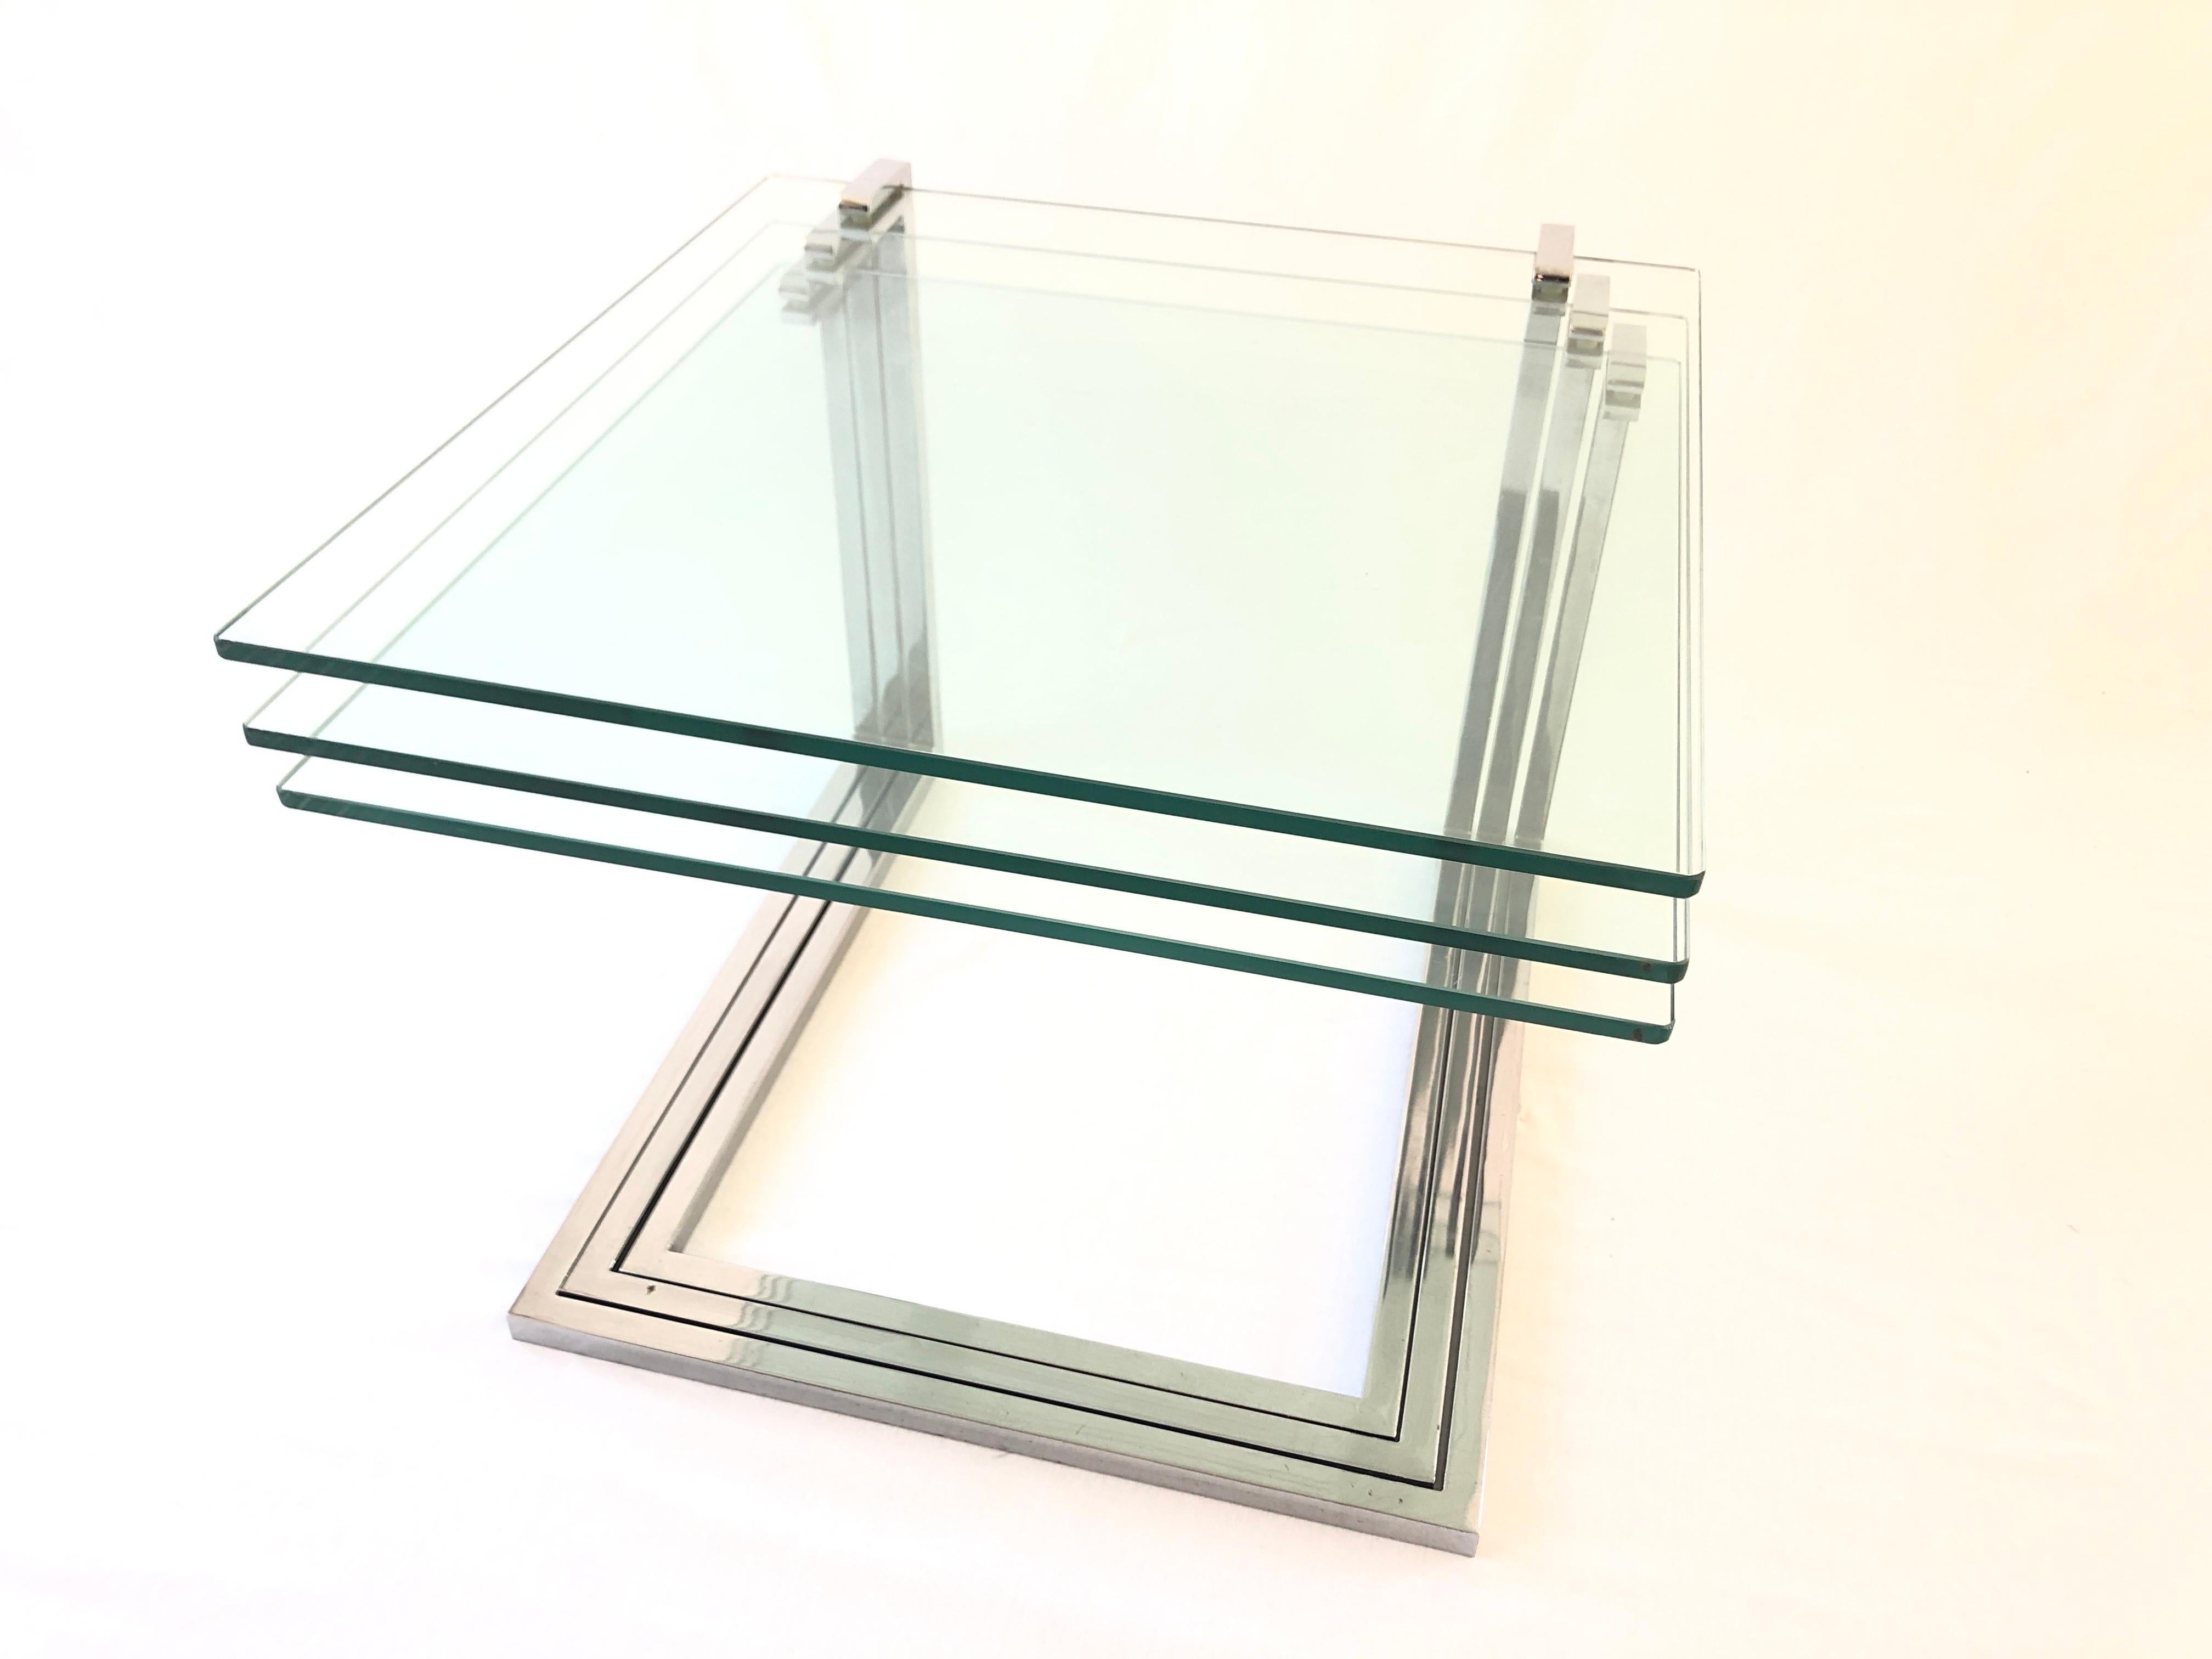 Chrome and Thick Glass Set of 3 Nesting Tables, 1970s, Germany

Measurtements :

55 cm x 55 cm x 45 cm

Please do not hesitate to ask us if you have any questions.